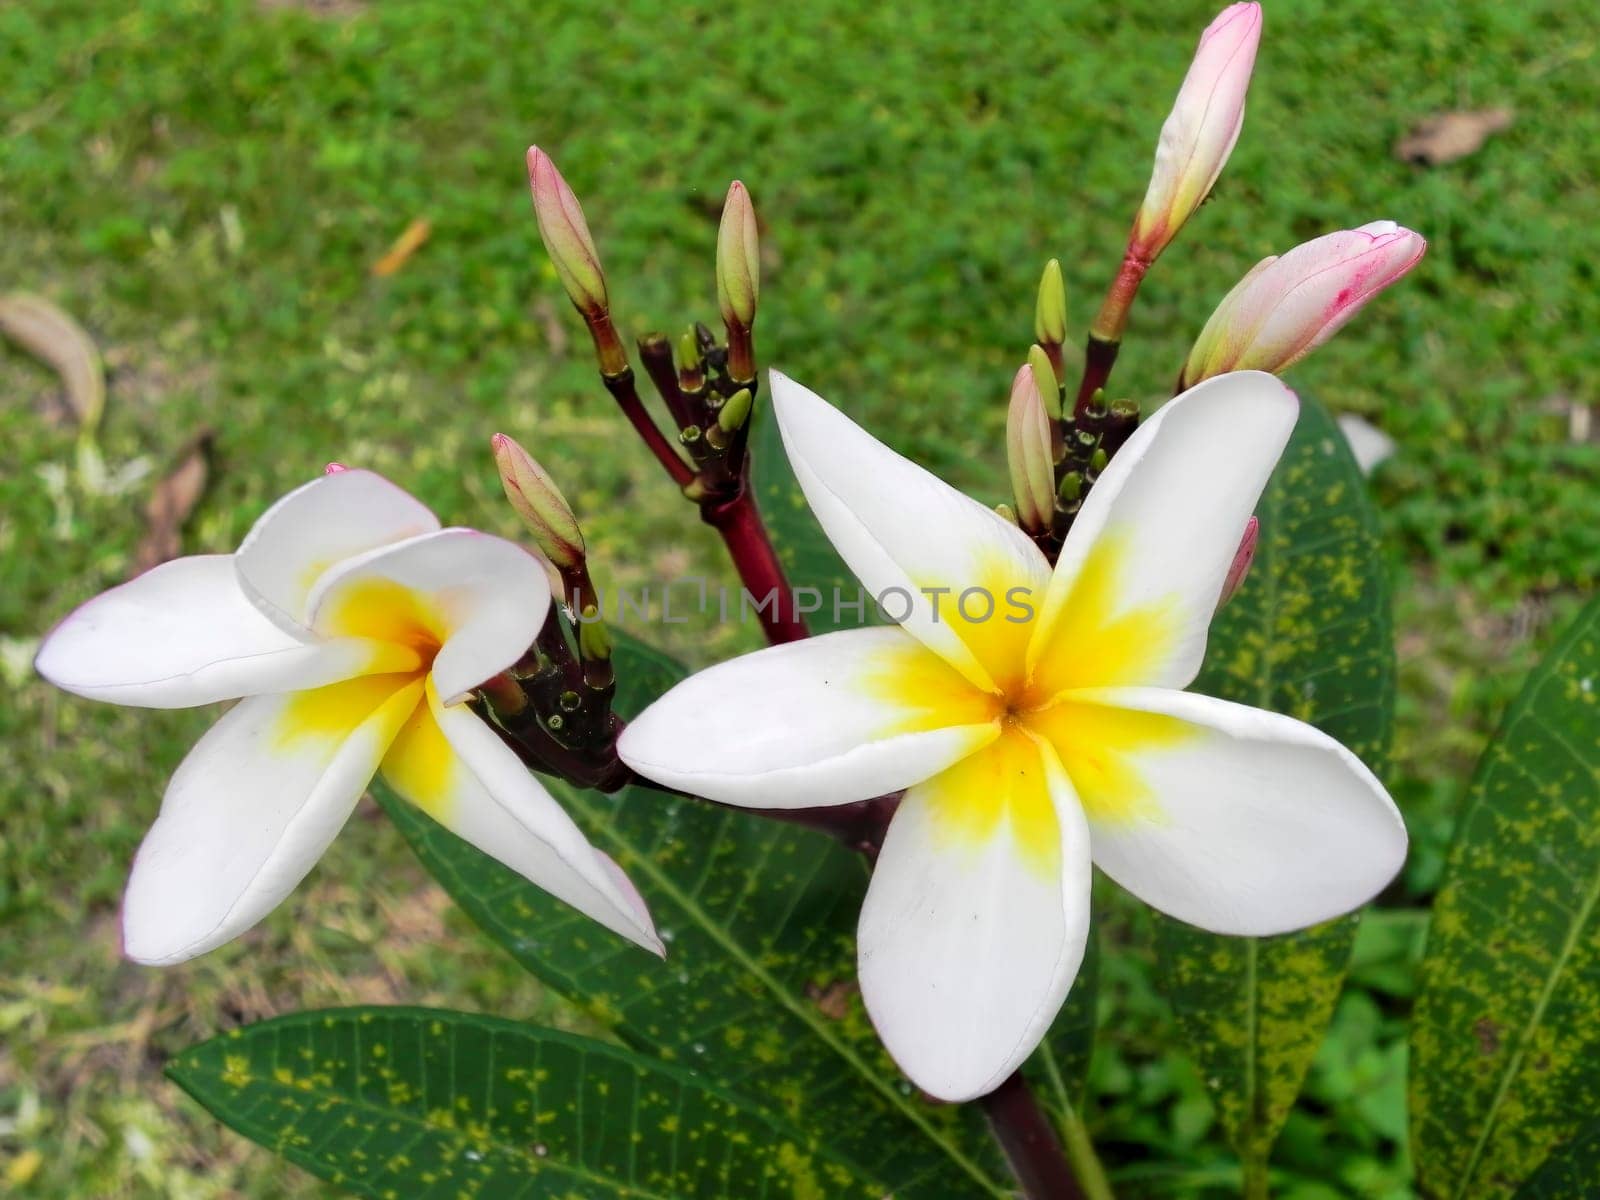 White and yellow plumeria flowers on a tree by Andre1ns